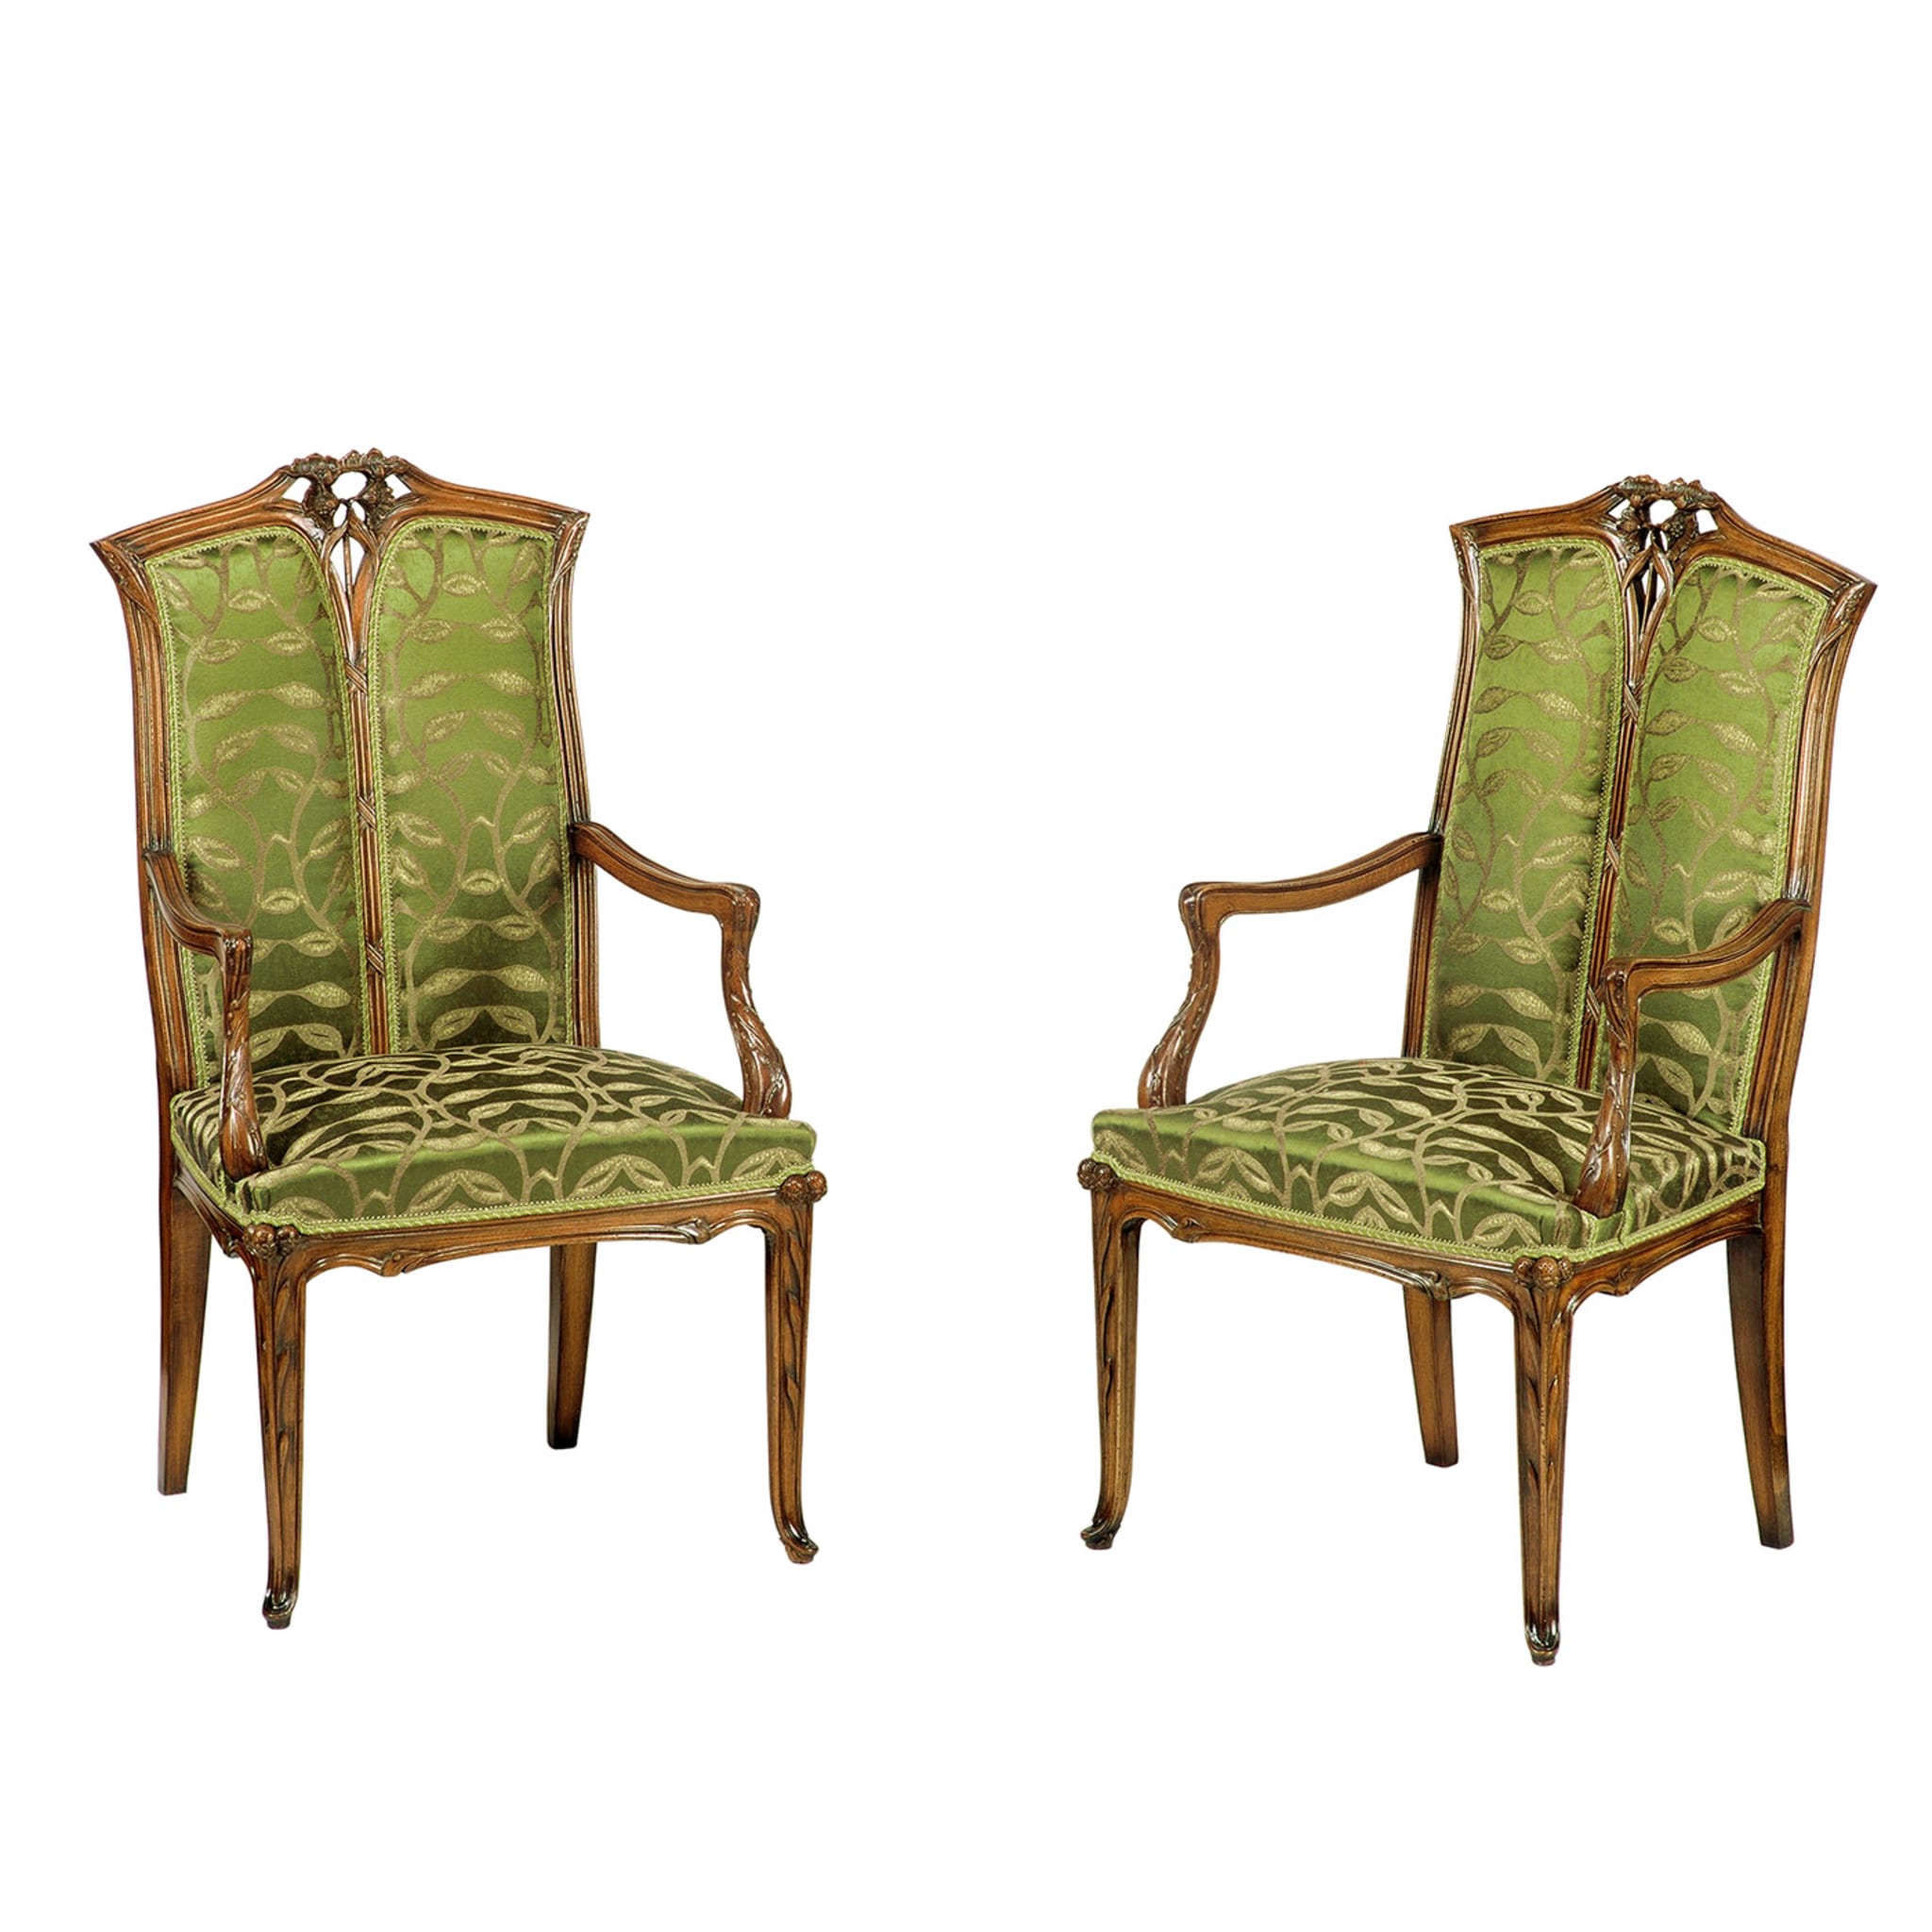 French Liberty Green Leaf Chair - Alternative view 1